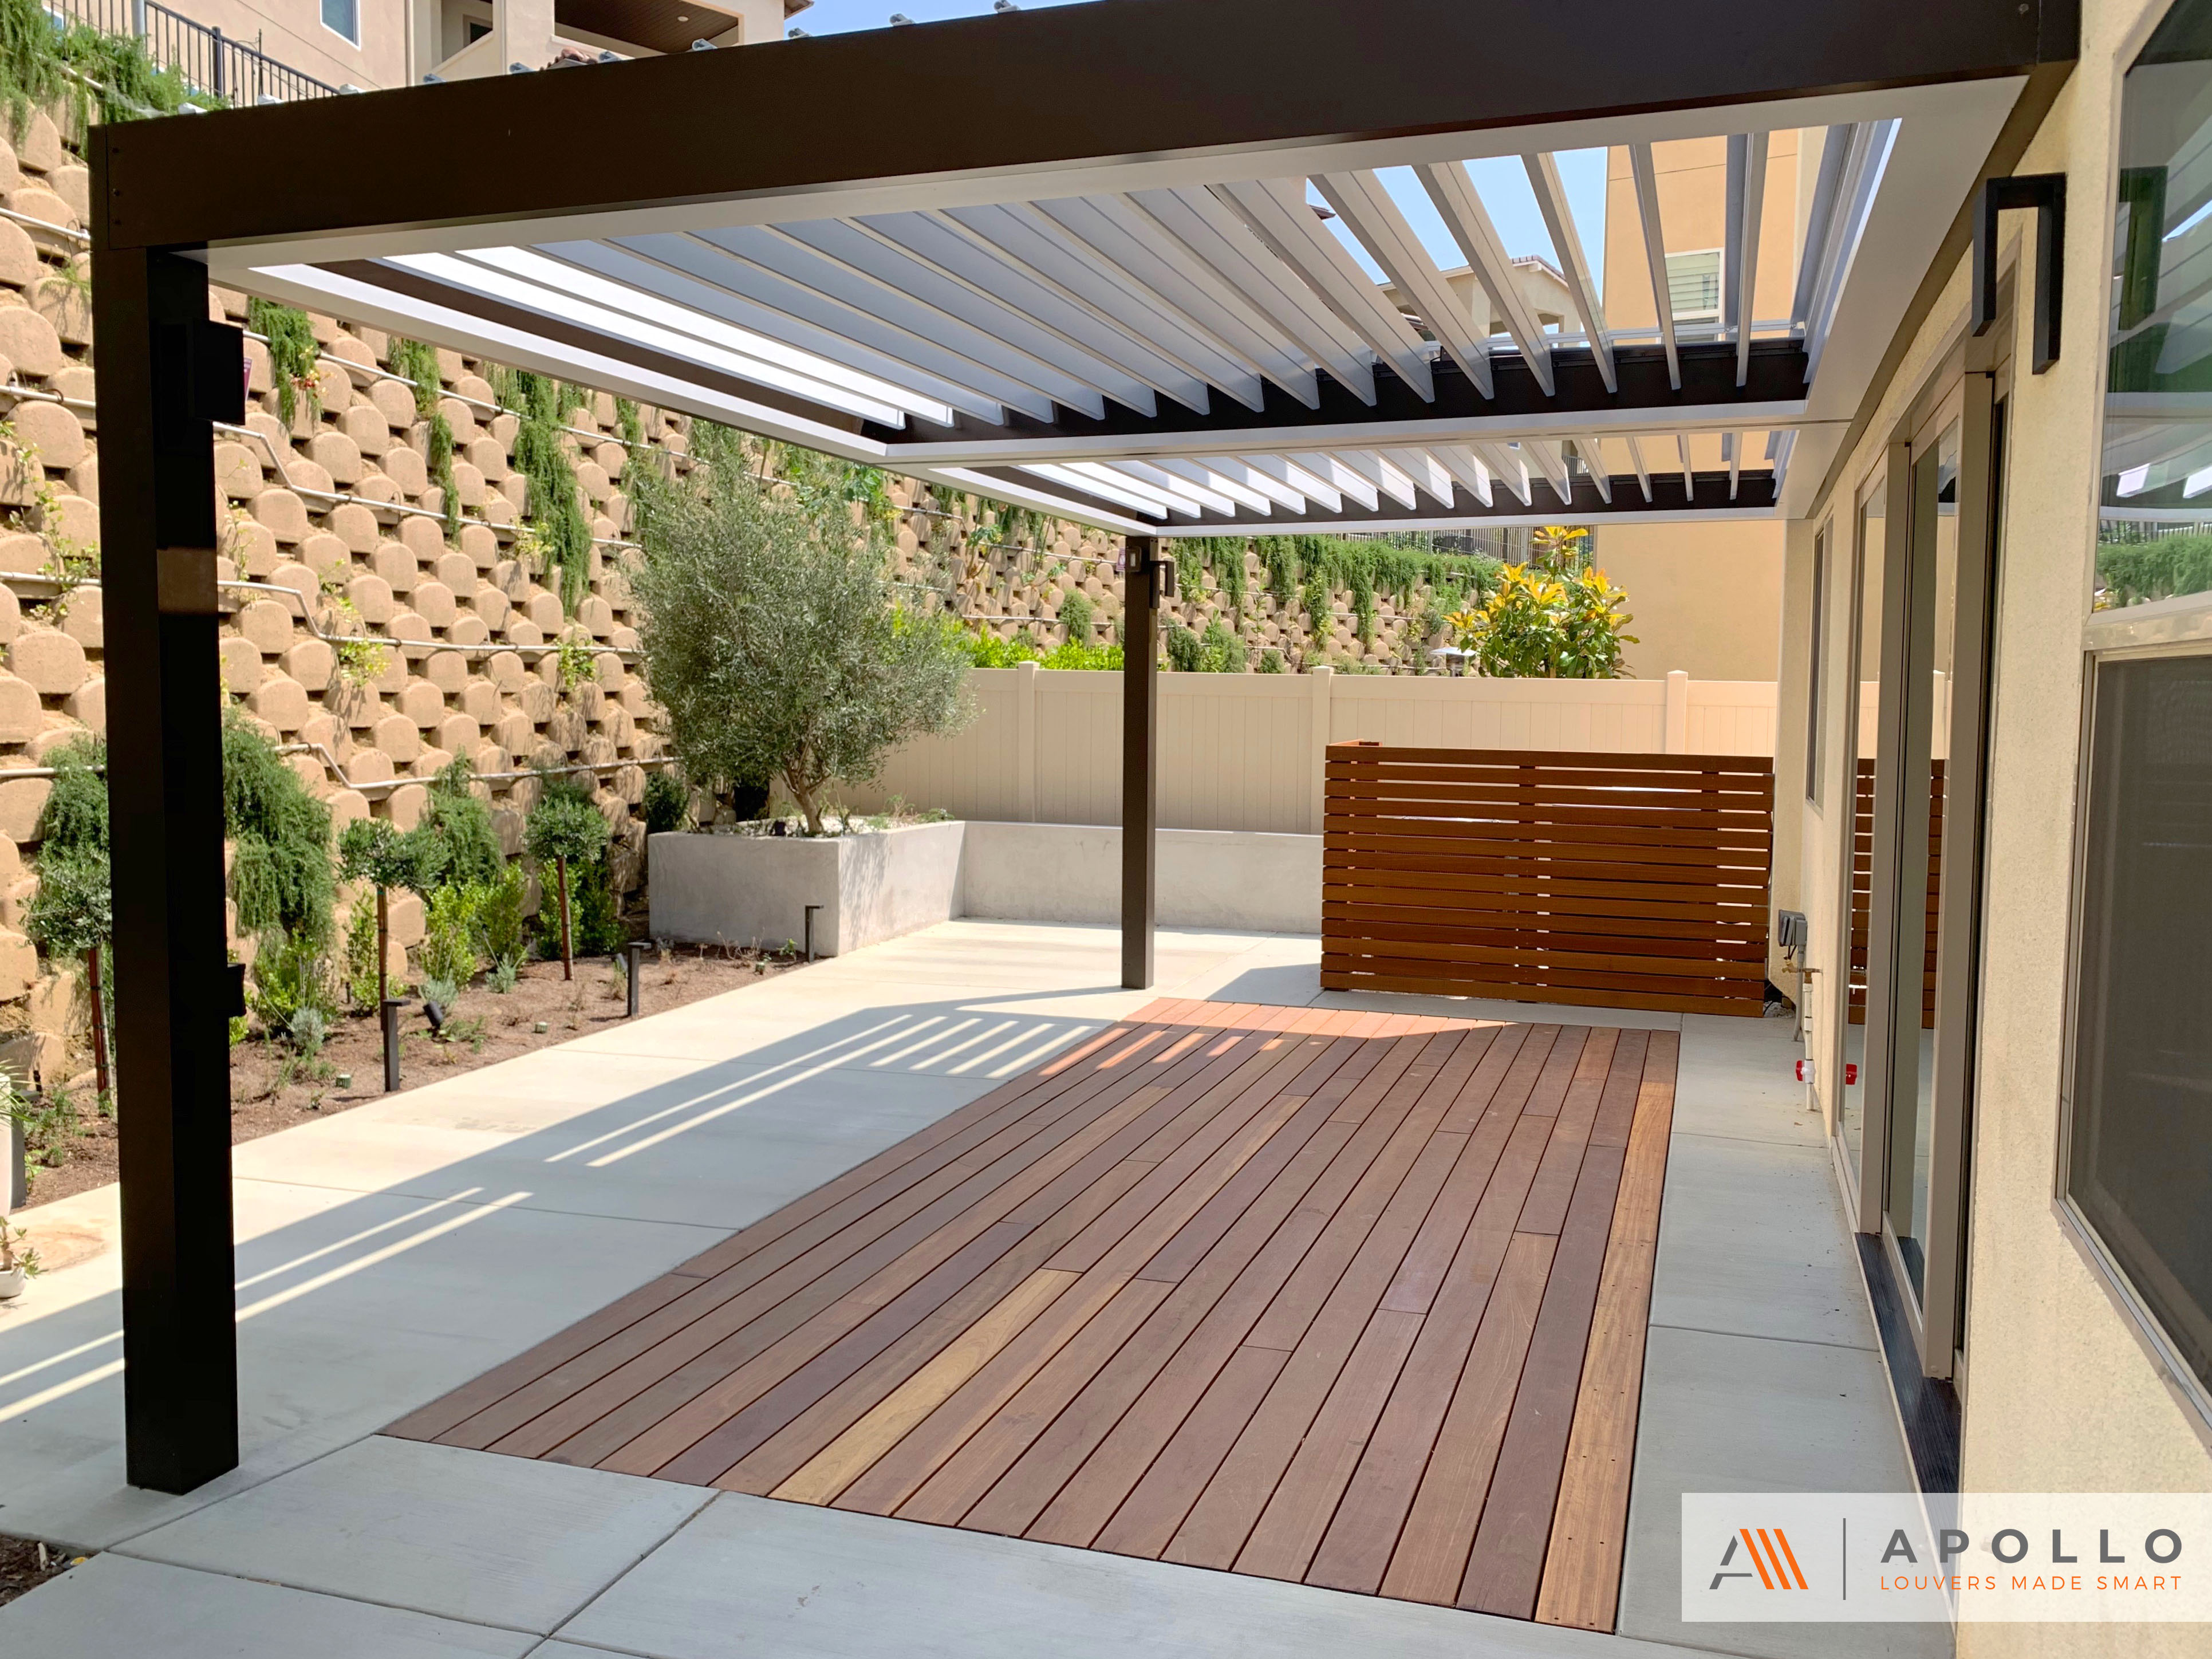 Apollo Opening Roof Smart Louvered, Electric Patio Covers